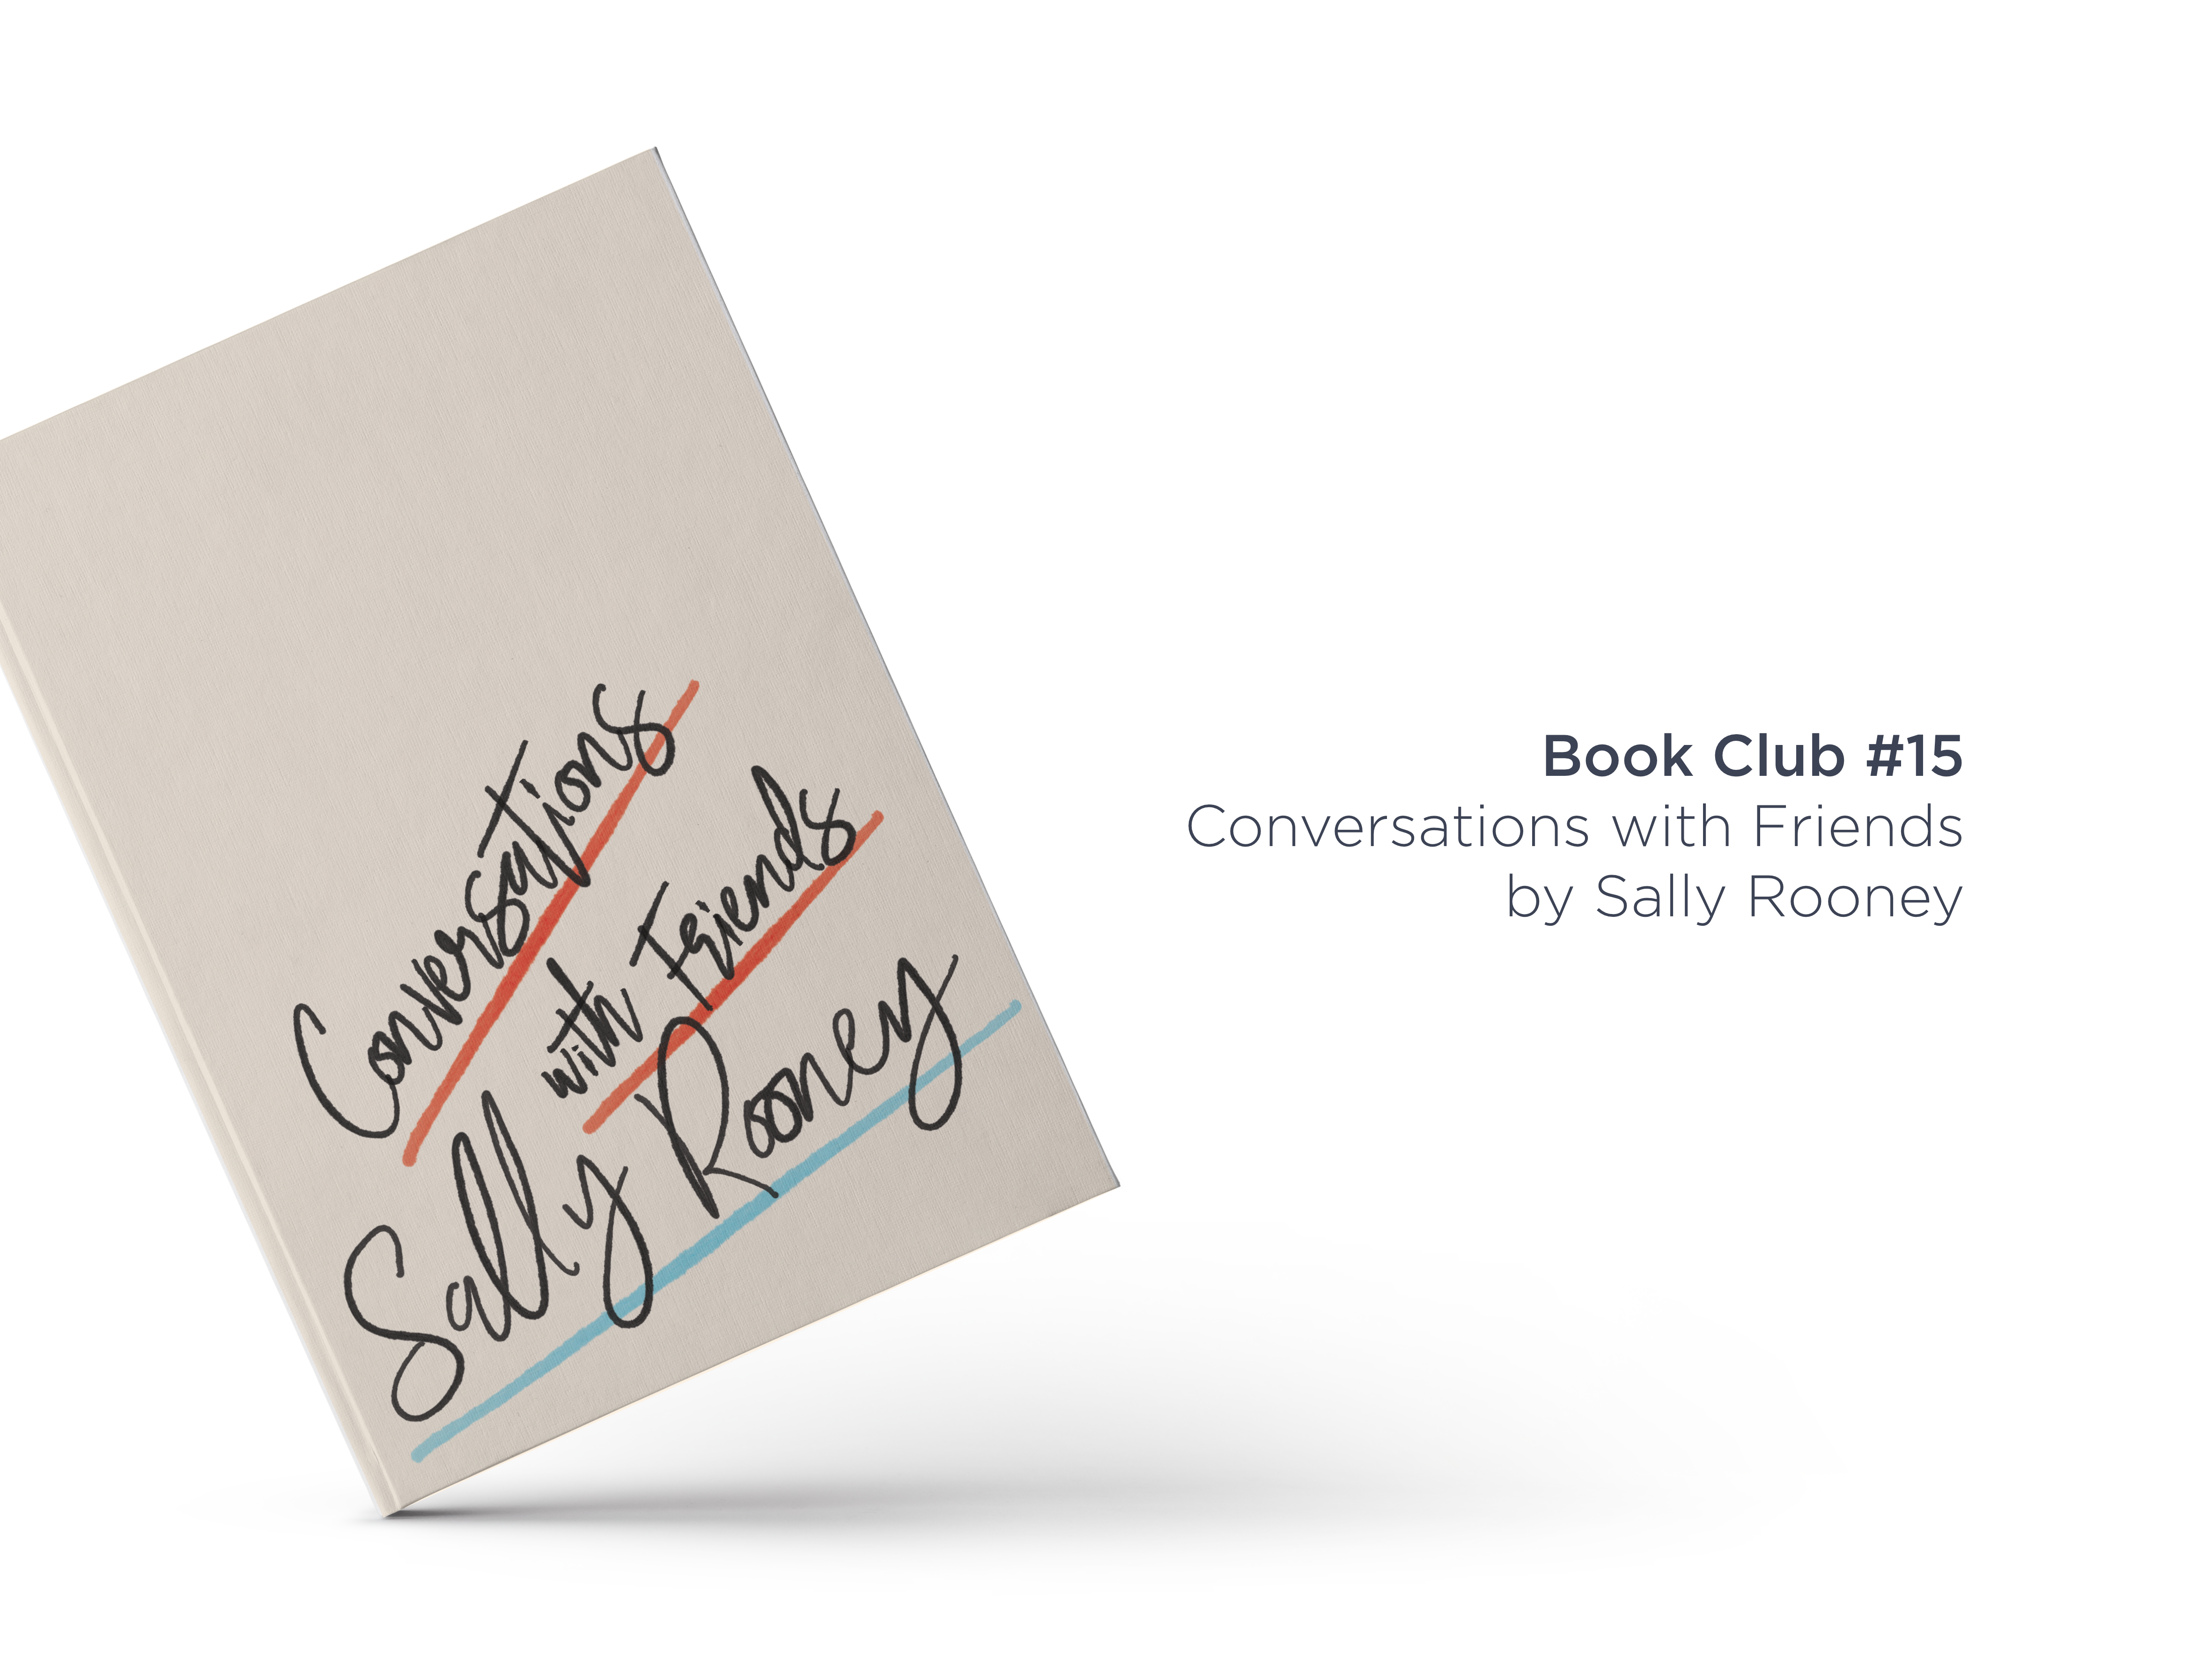 Book Club #15: Conversations with Friends by Sally Rooney